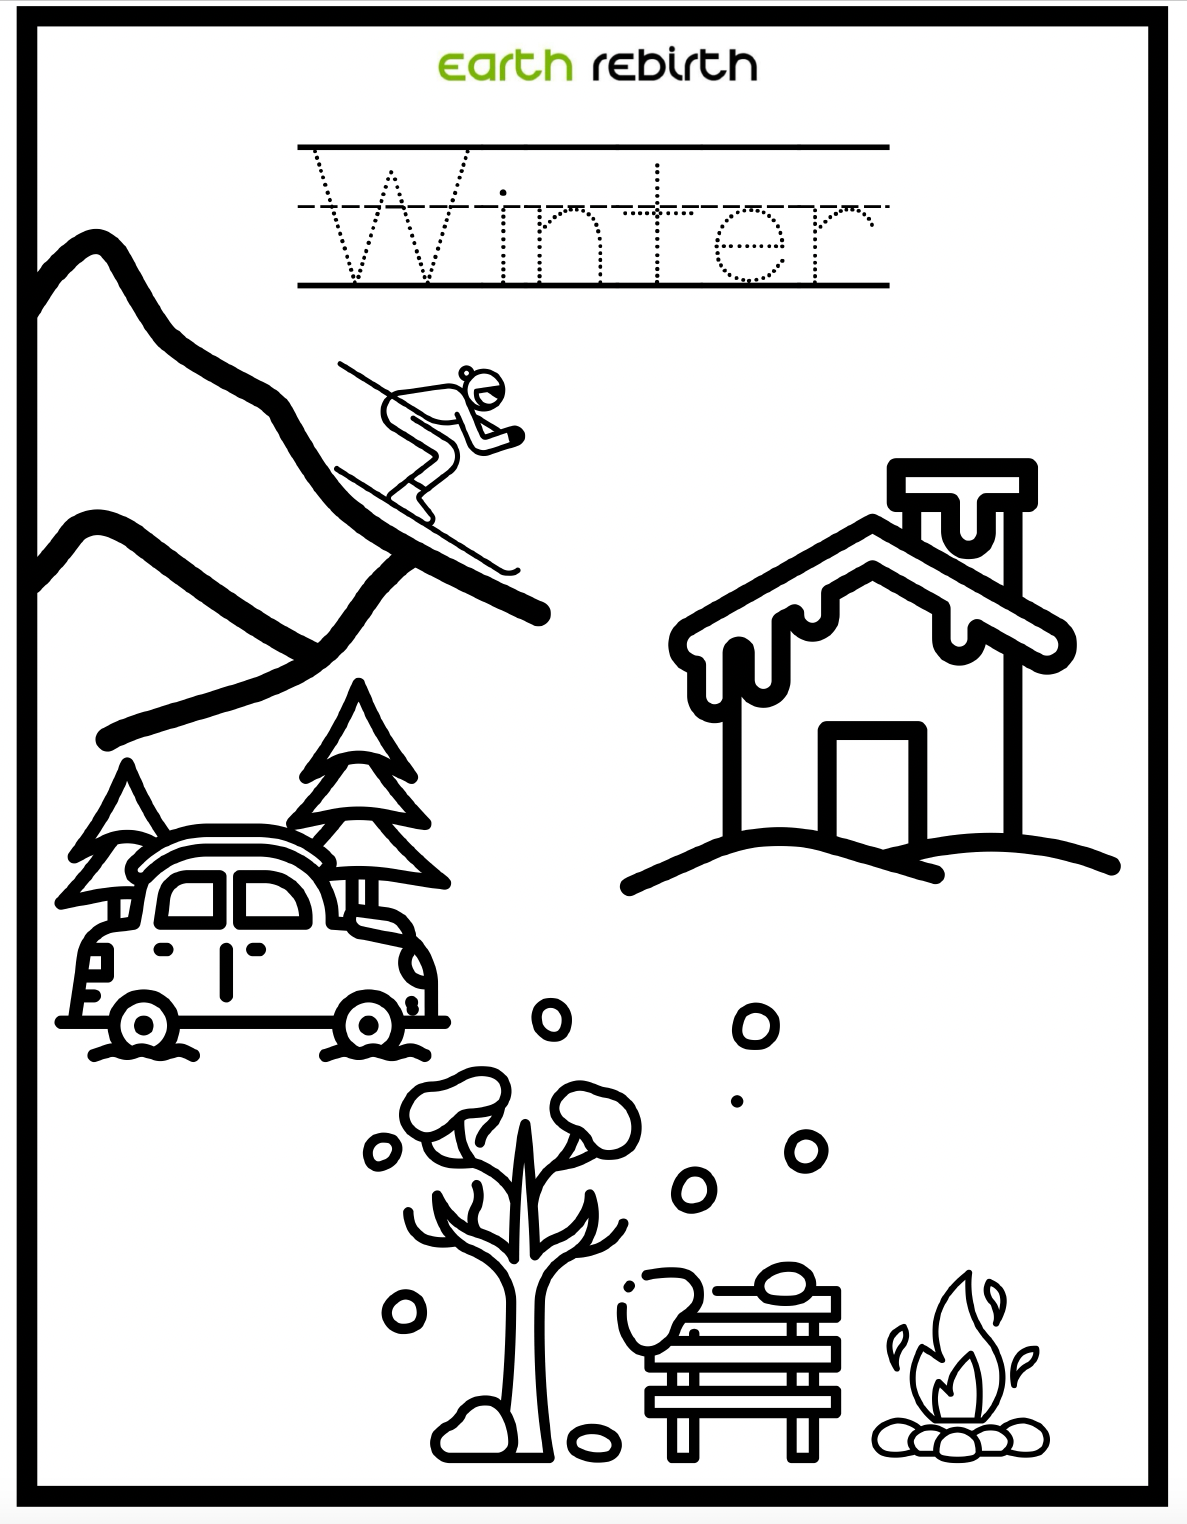 Colorful Season Coloring Book for Kids